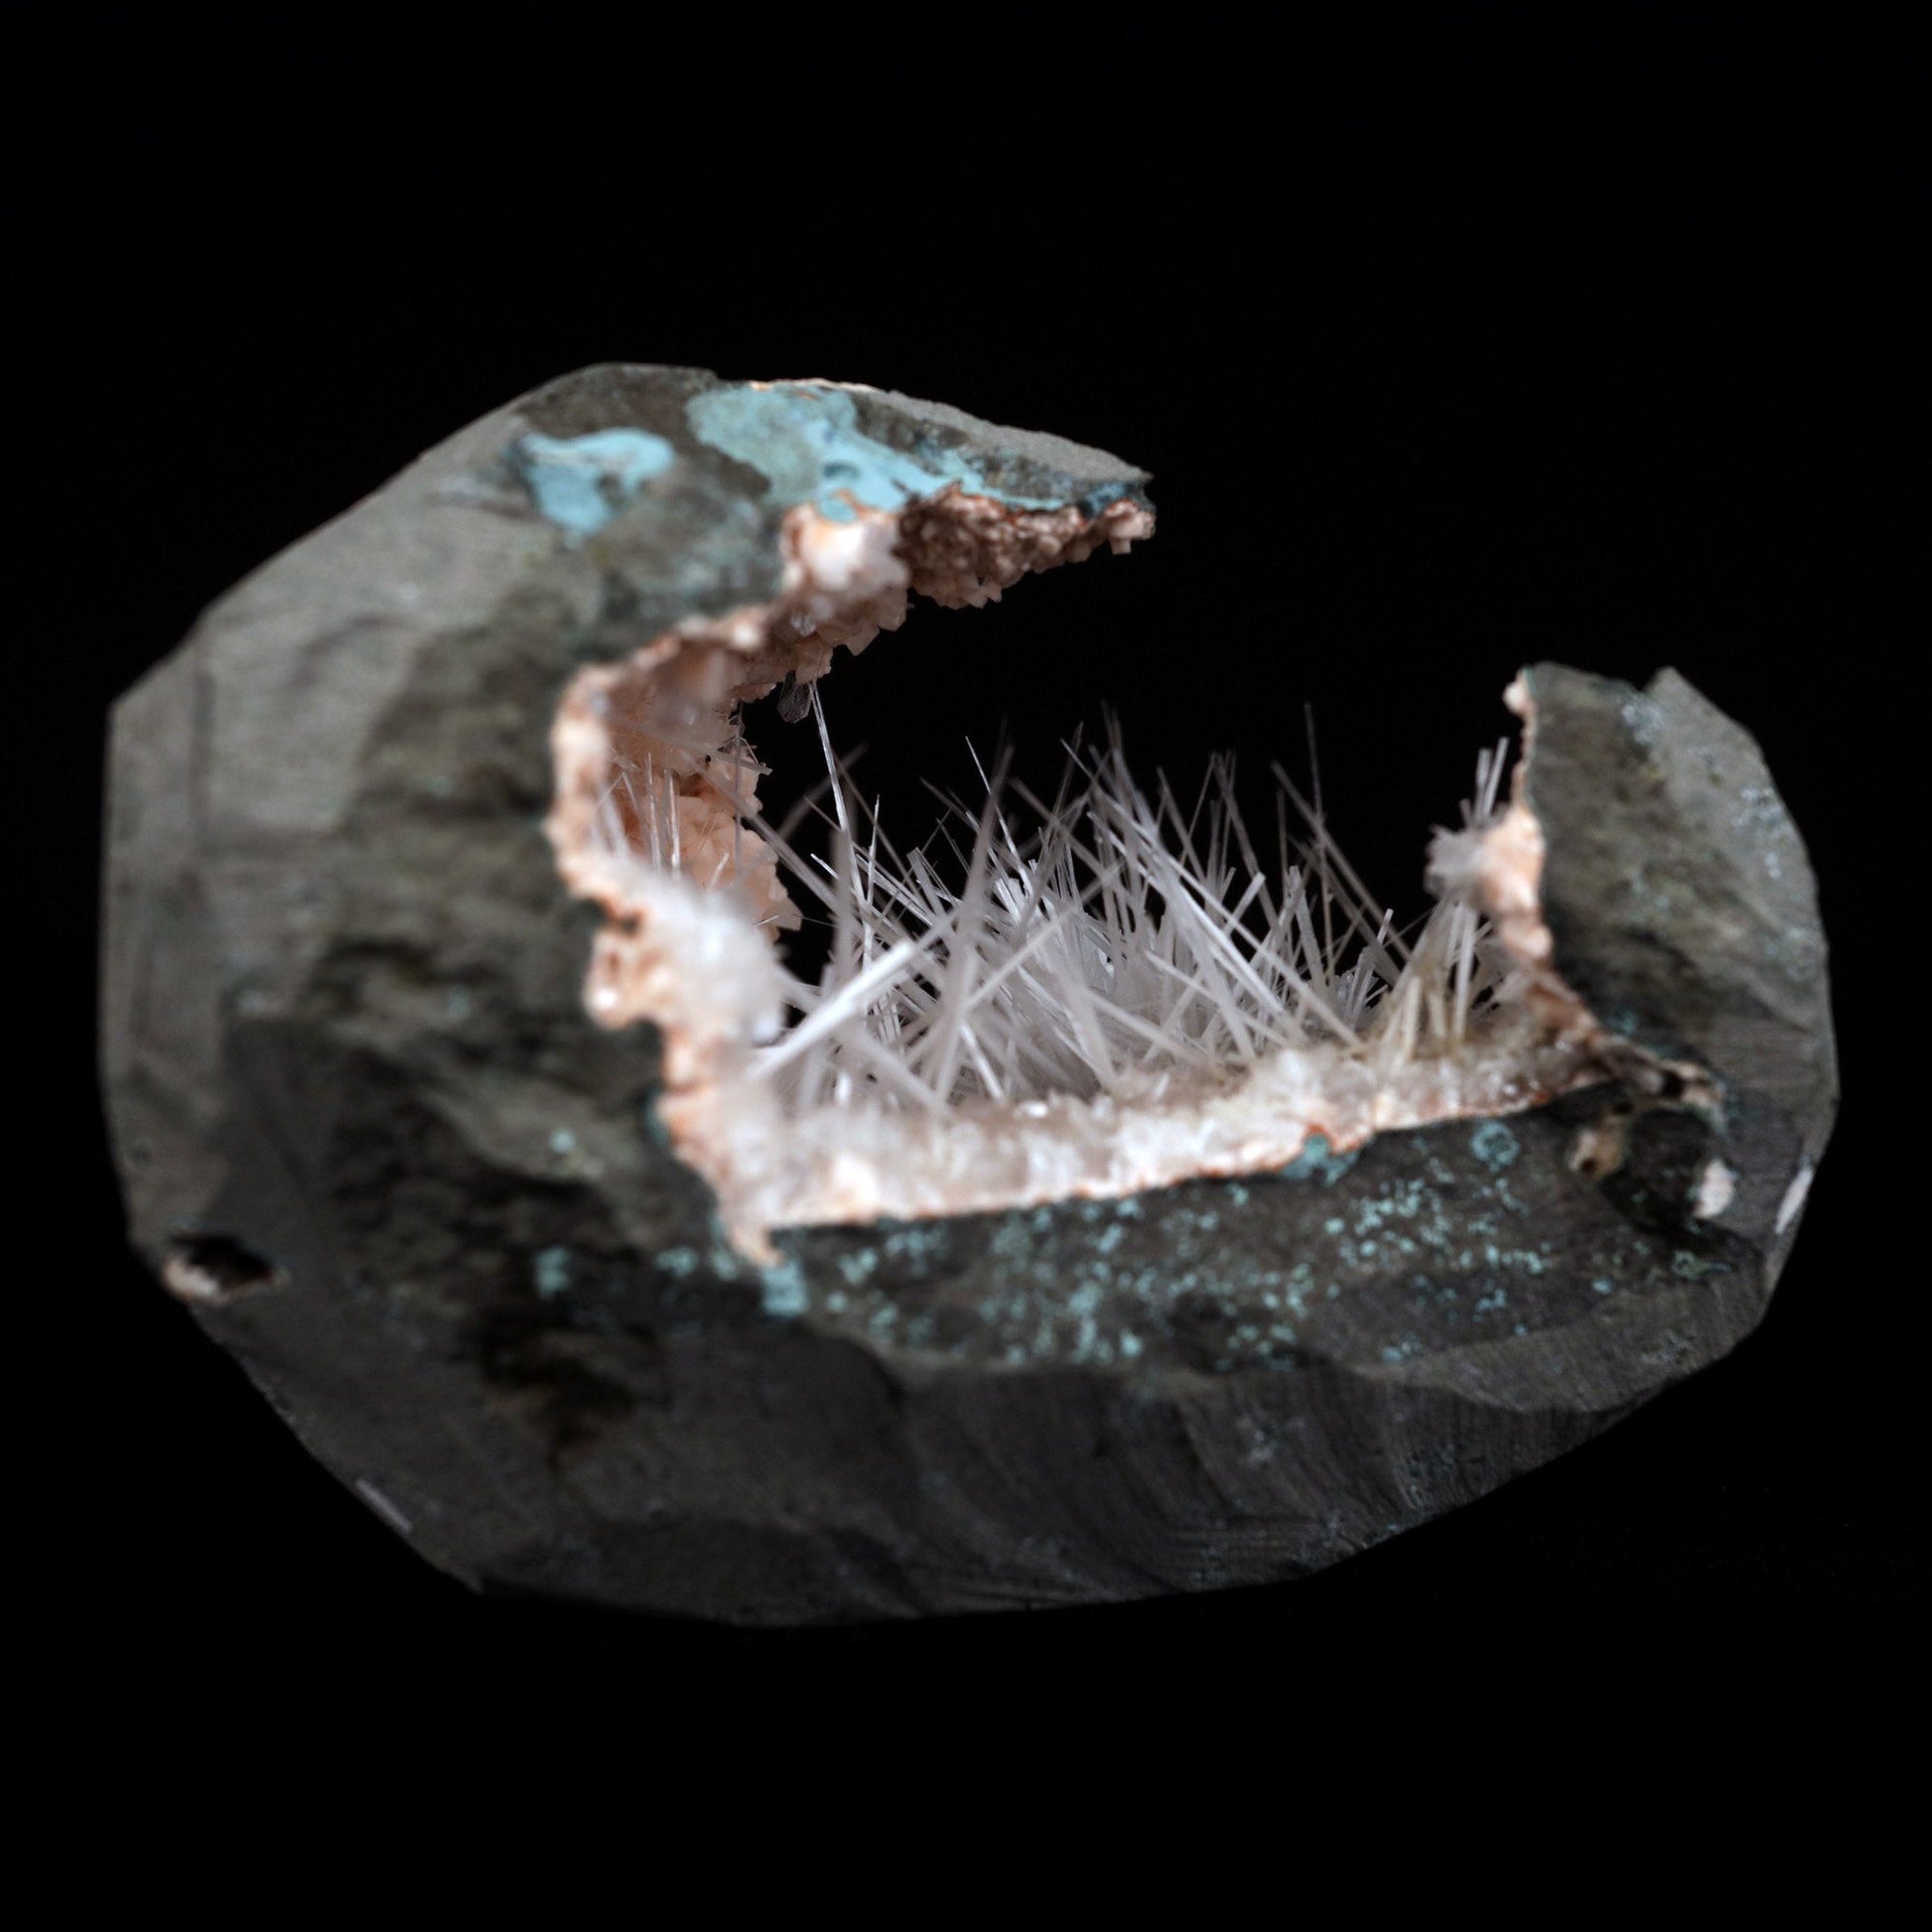 Scolecite Sprays Inside Heulandite See through Geode Natural Mineral S…  https://www.superbminerals.us/products/scolecite-sprays-inside-heulandite-see-through-geode-natural-mineral-specimen-b-4906  Features: A huge Geode with beige Heulandite crystals and a conspicuous radial spray of glossy, colourless, extremely transparent, acicular (needle-like) Scolecite crystals throughout, as well as numerous solitary Scolecite crystals. Simply breathtaking - the crystal structure, lustre, contrast, and symmetry 